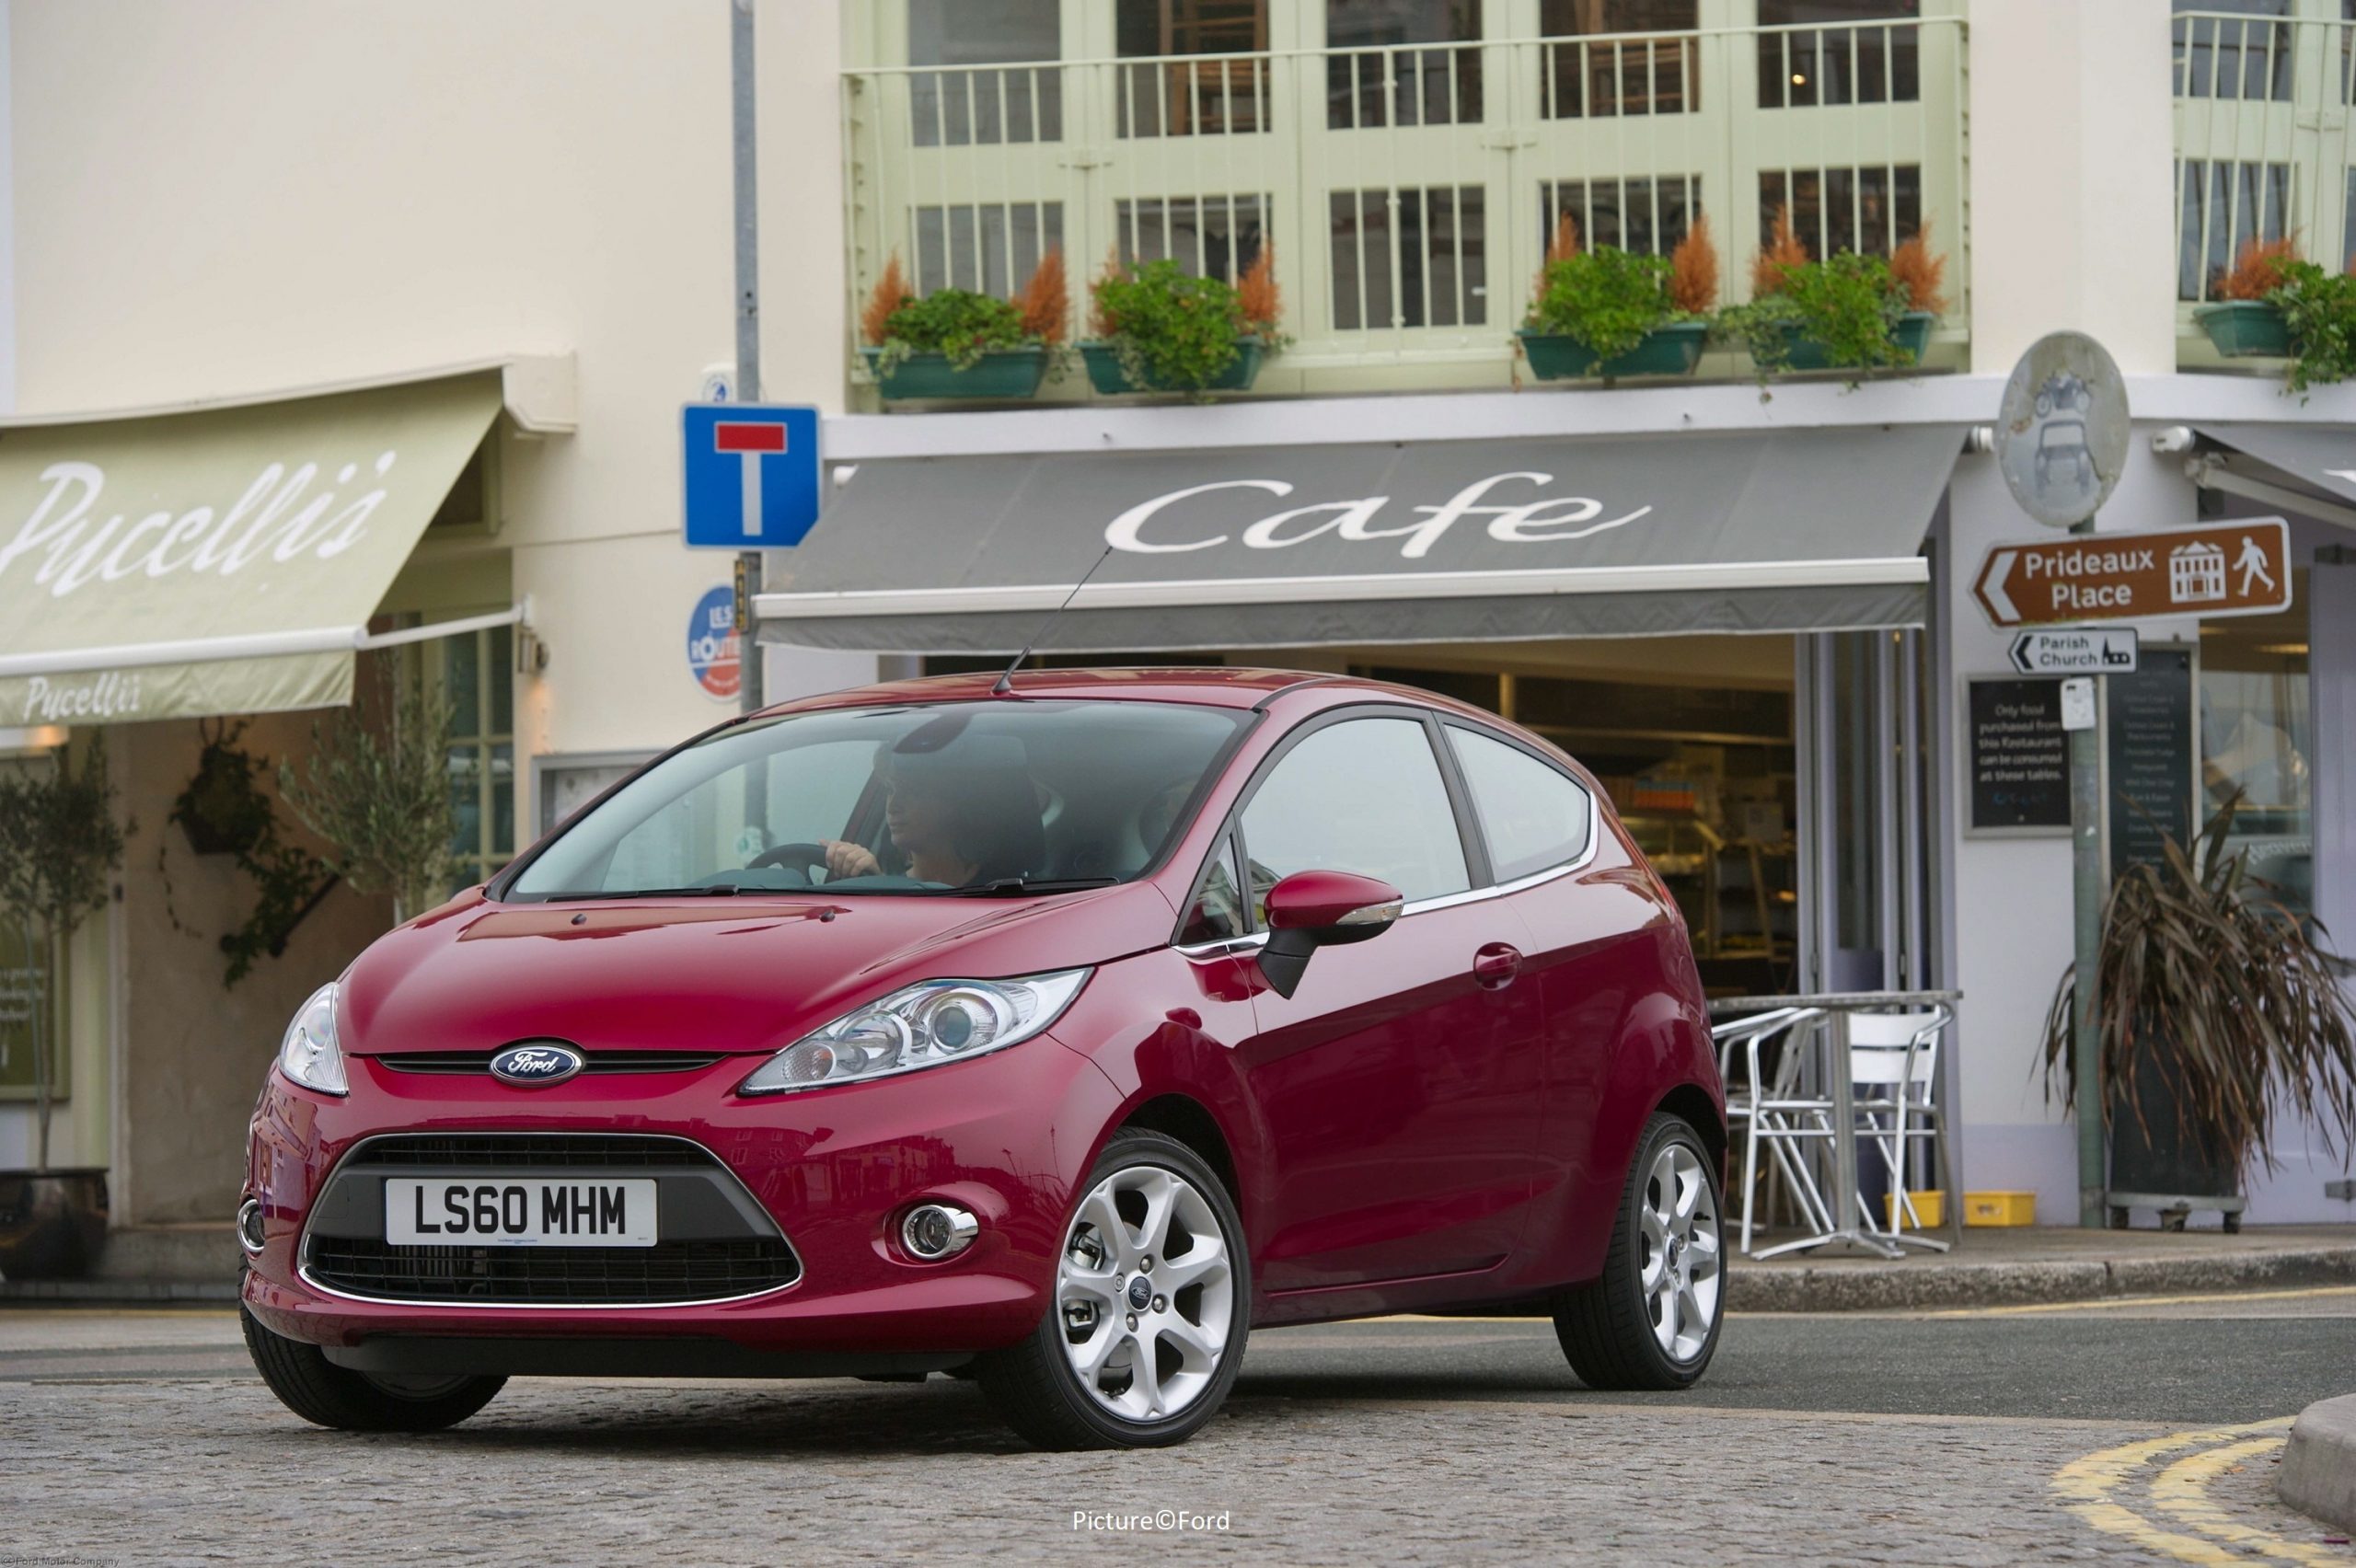 Why is the Ford Fiesta Britain’s best-selling car?